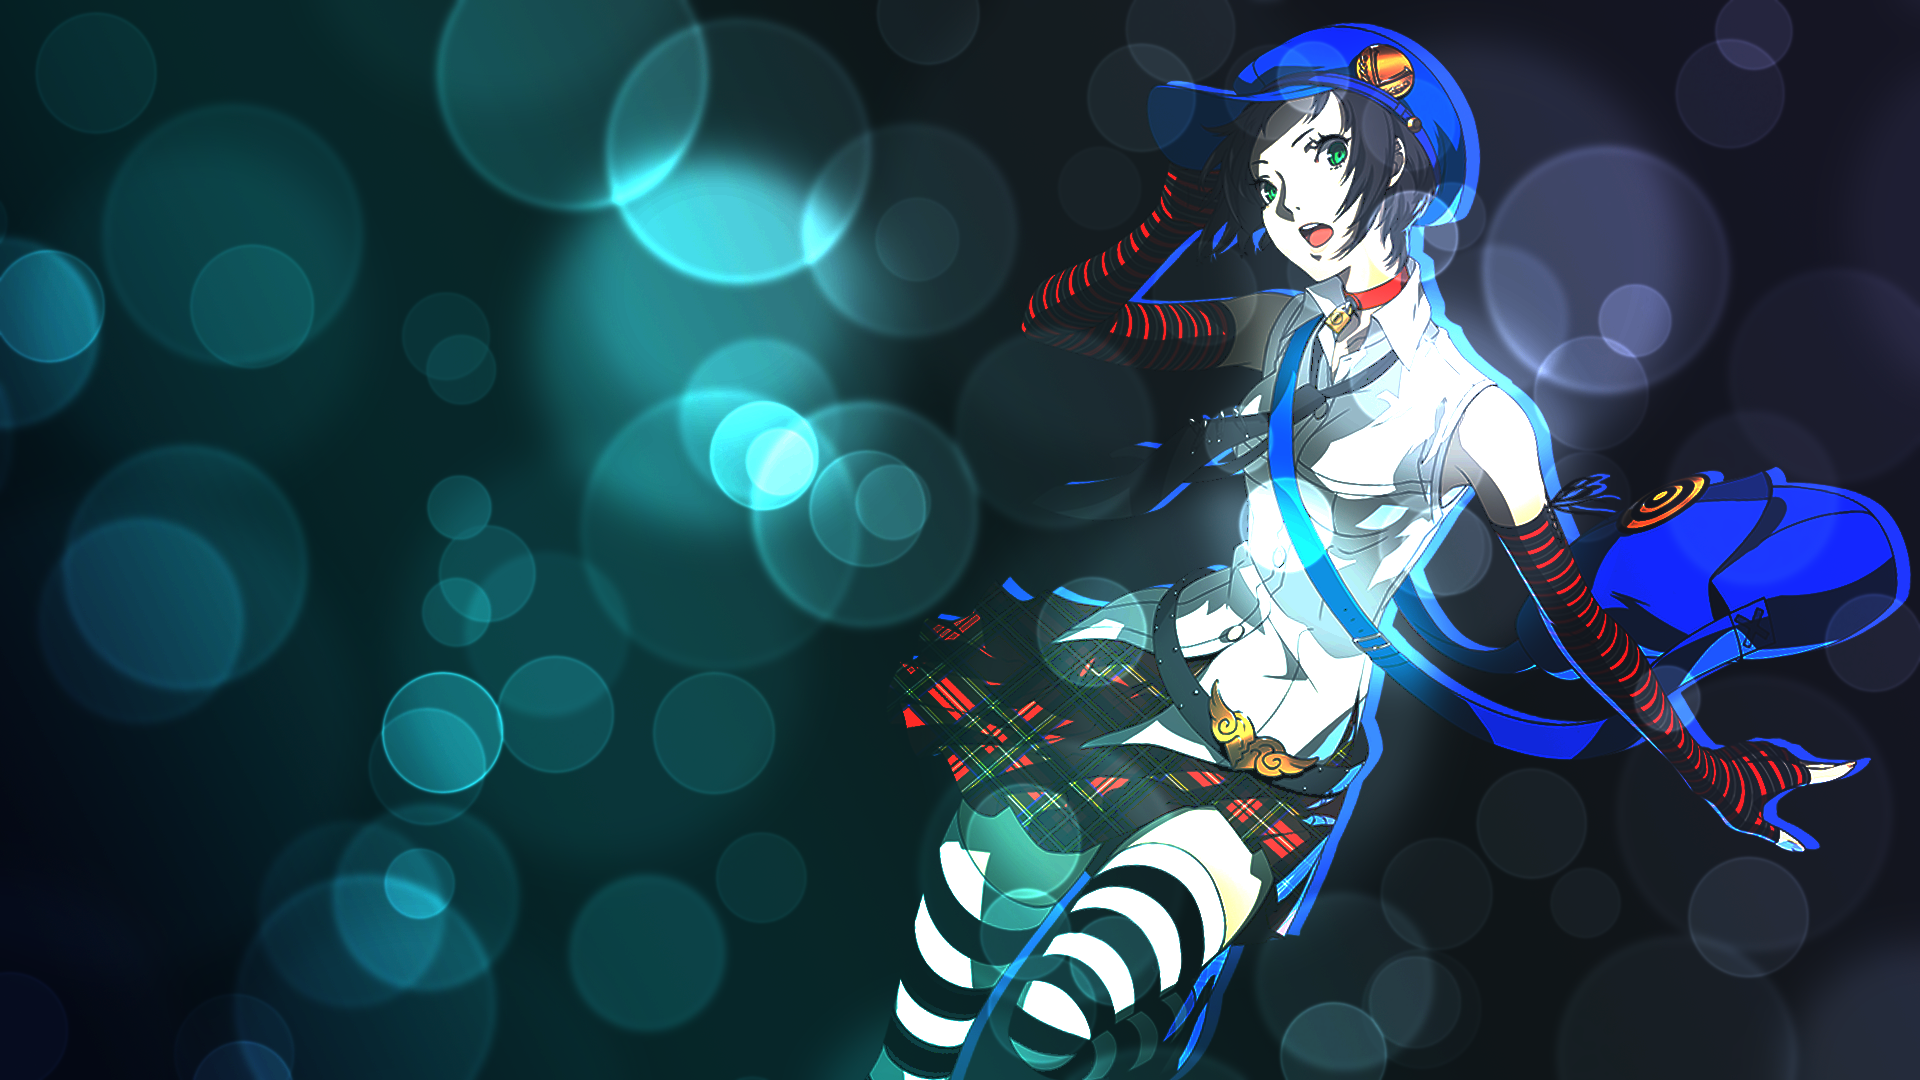 Free Download Persona 4 Golden Marie Wallpaper V1 By Samuraiex 19x1080 For Your Desktop Mobile Tablet Explore 49 Persona 4 Golden Wallpaper Persona 4 Hd Wallpaper Persona Q Wallpaper Persona 4 Iphone Wallpaper